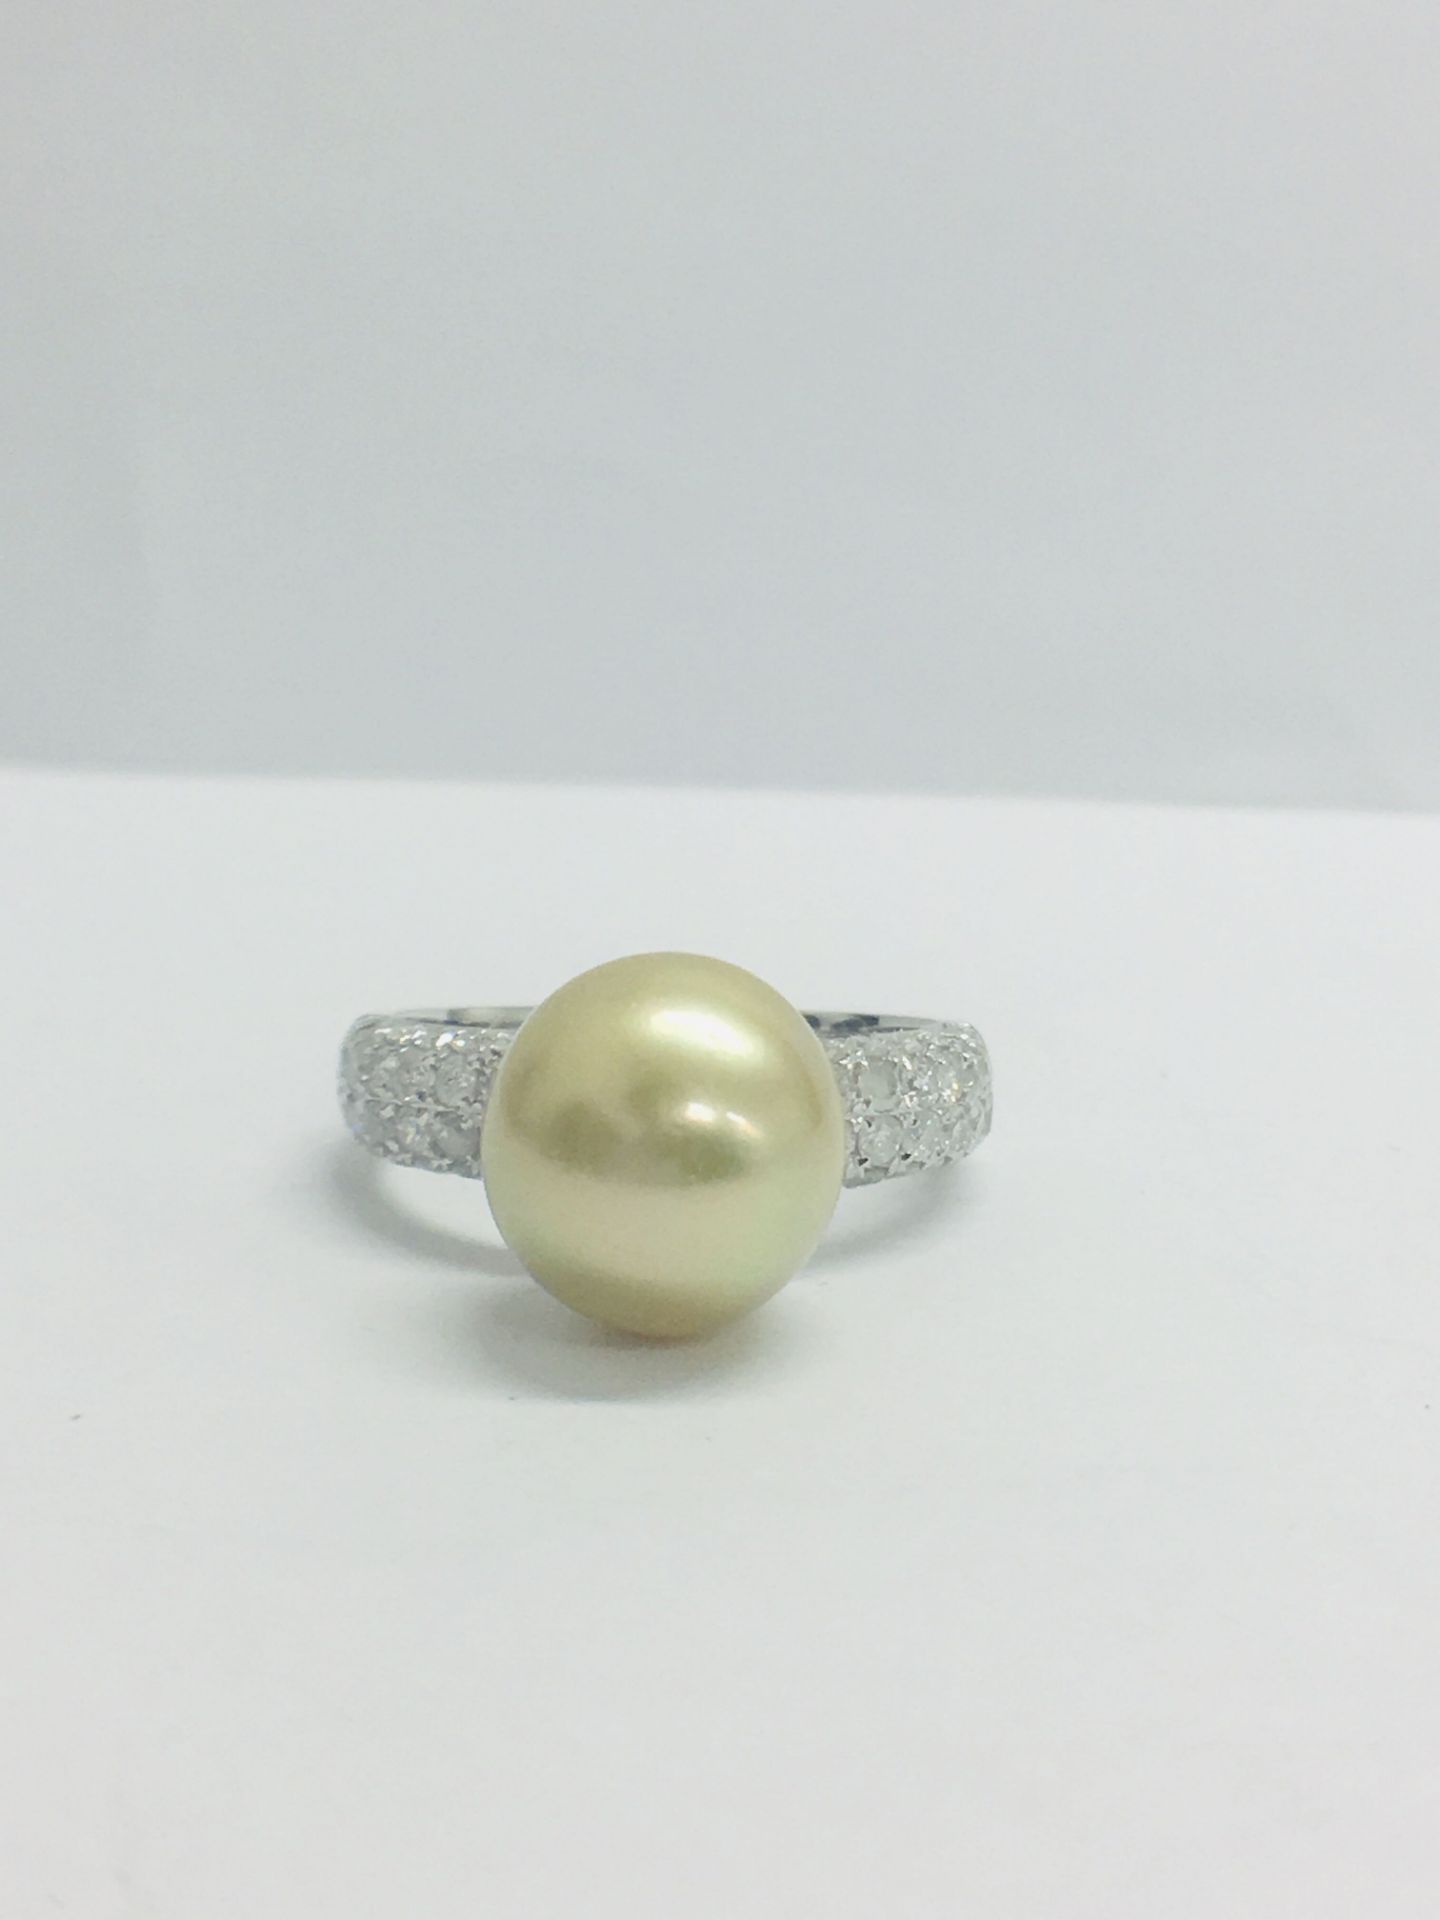 14ct White Gold Pearl & Diamond Ring - Image 3 of 11